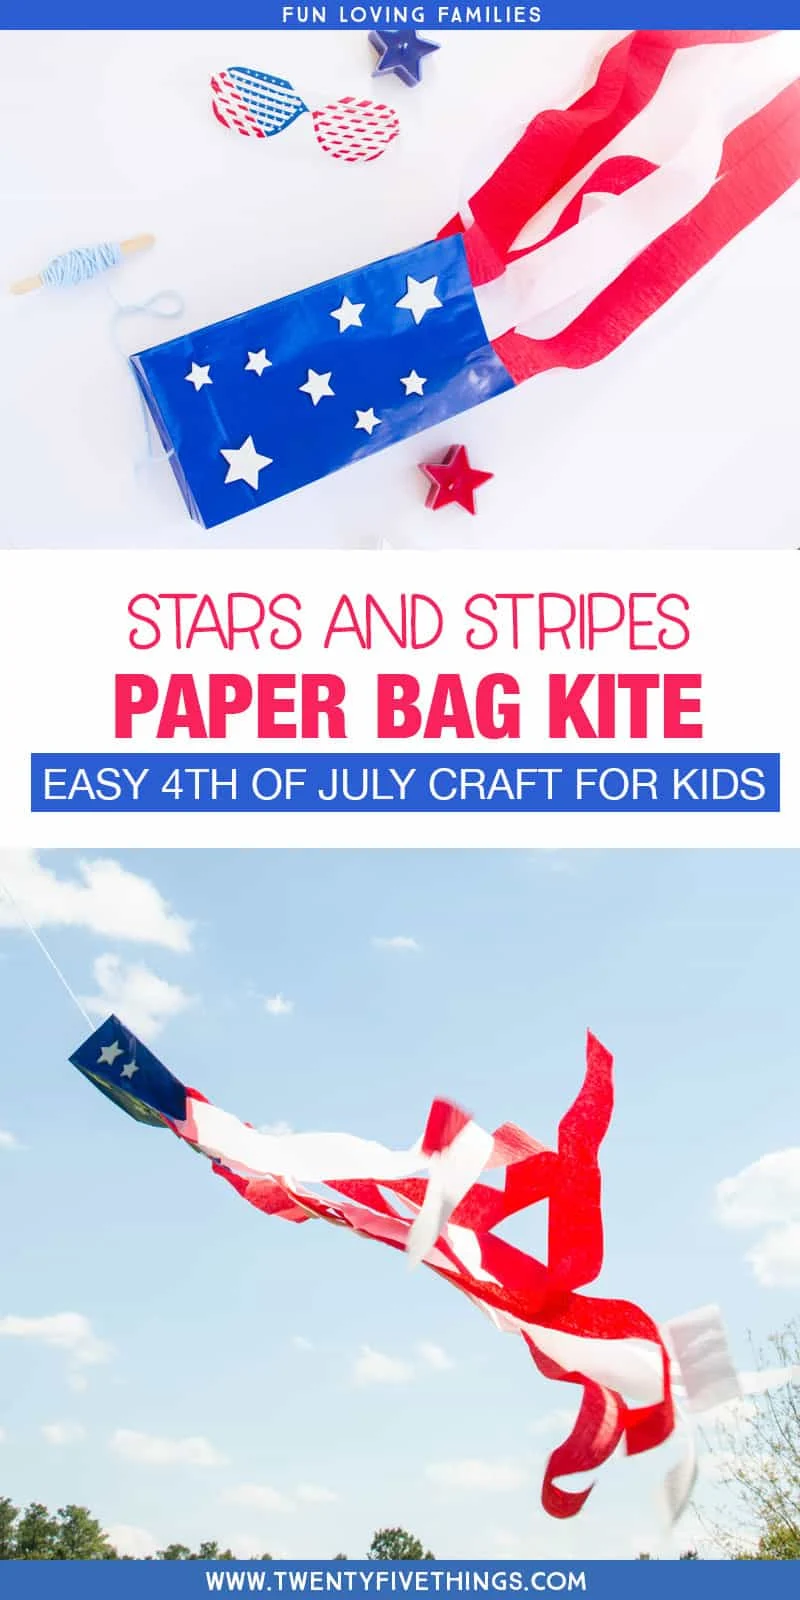 Easy 4th of July craft for kids. Make this simple DIY paper bag kite, decorated with the stars and stripes, for a fun patriotic craft that the kids will love. 